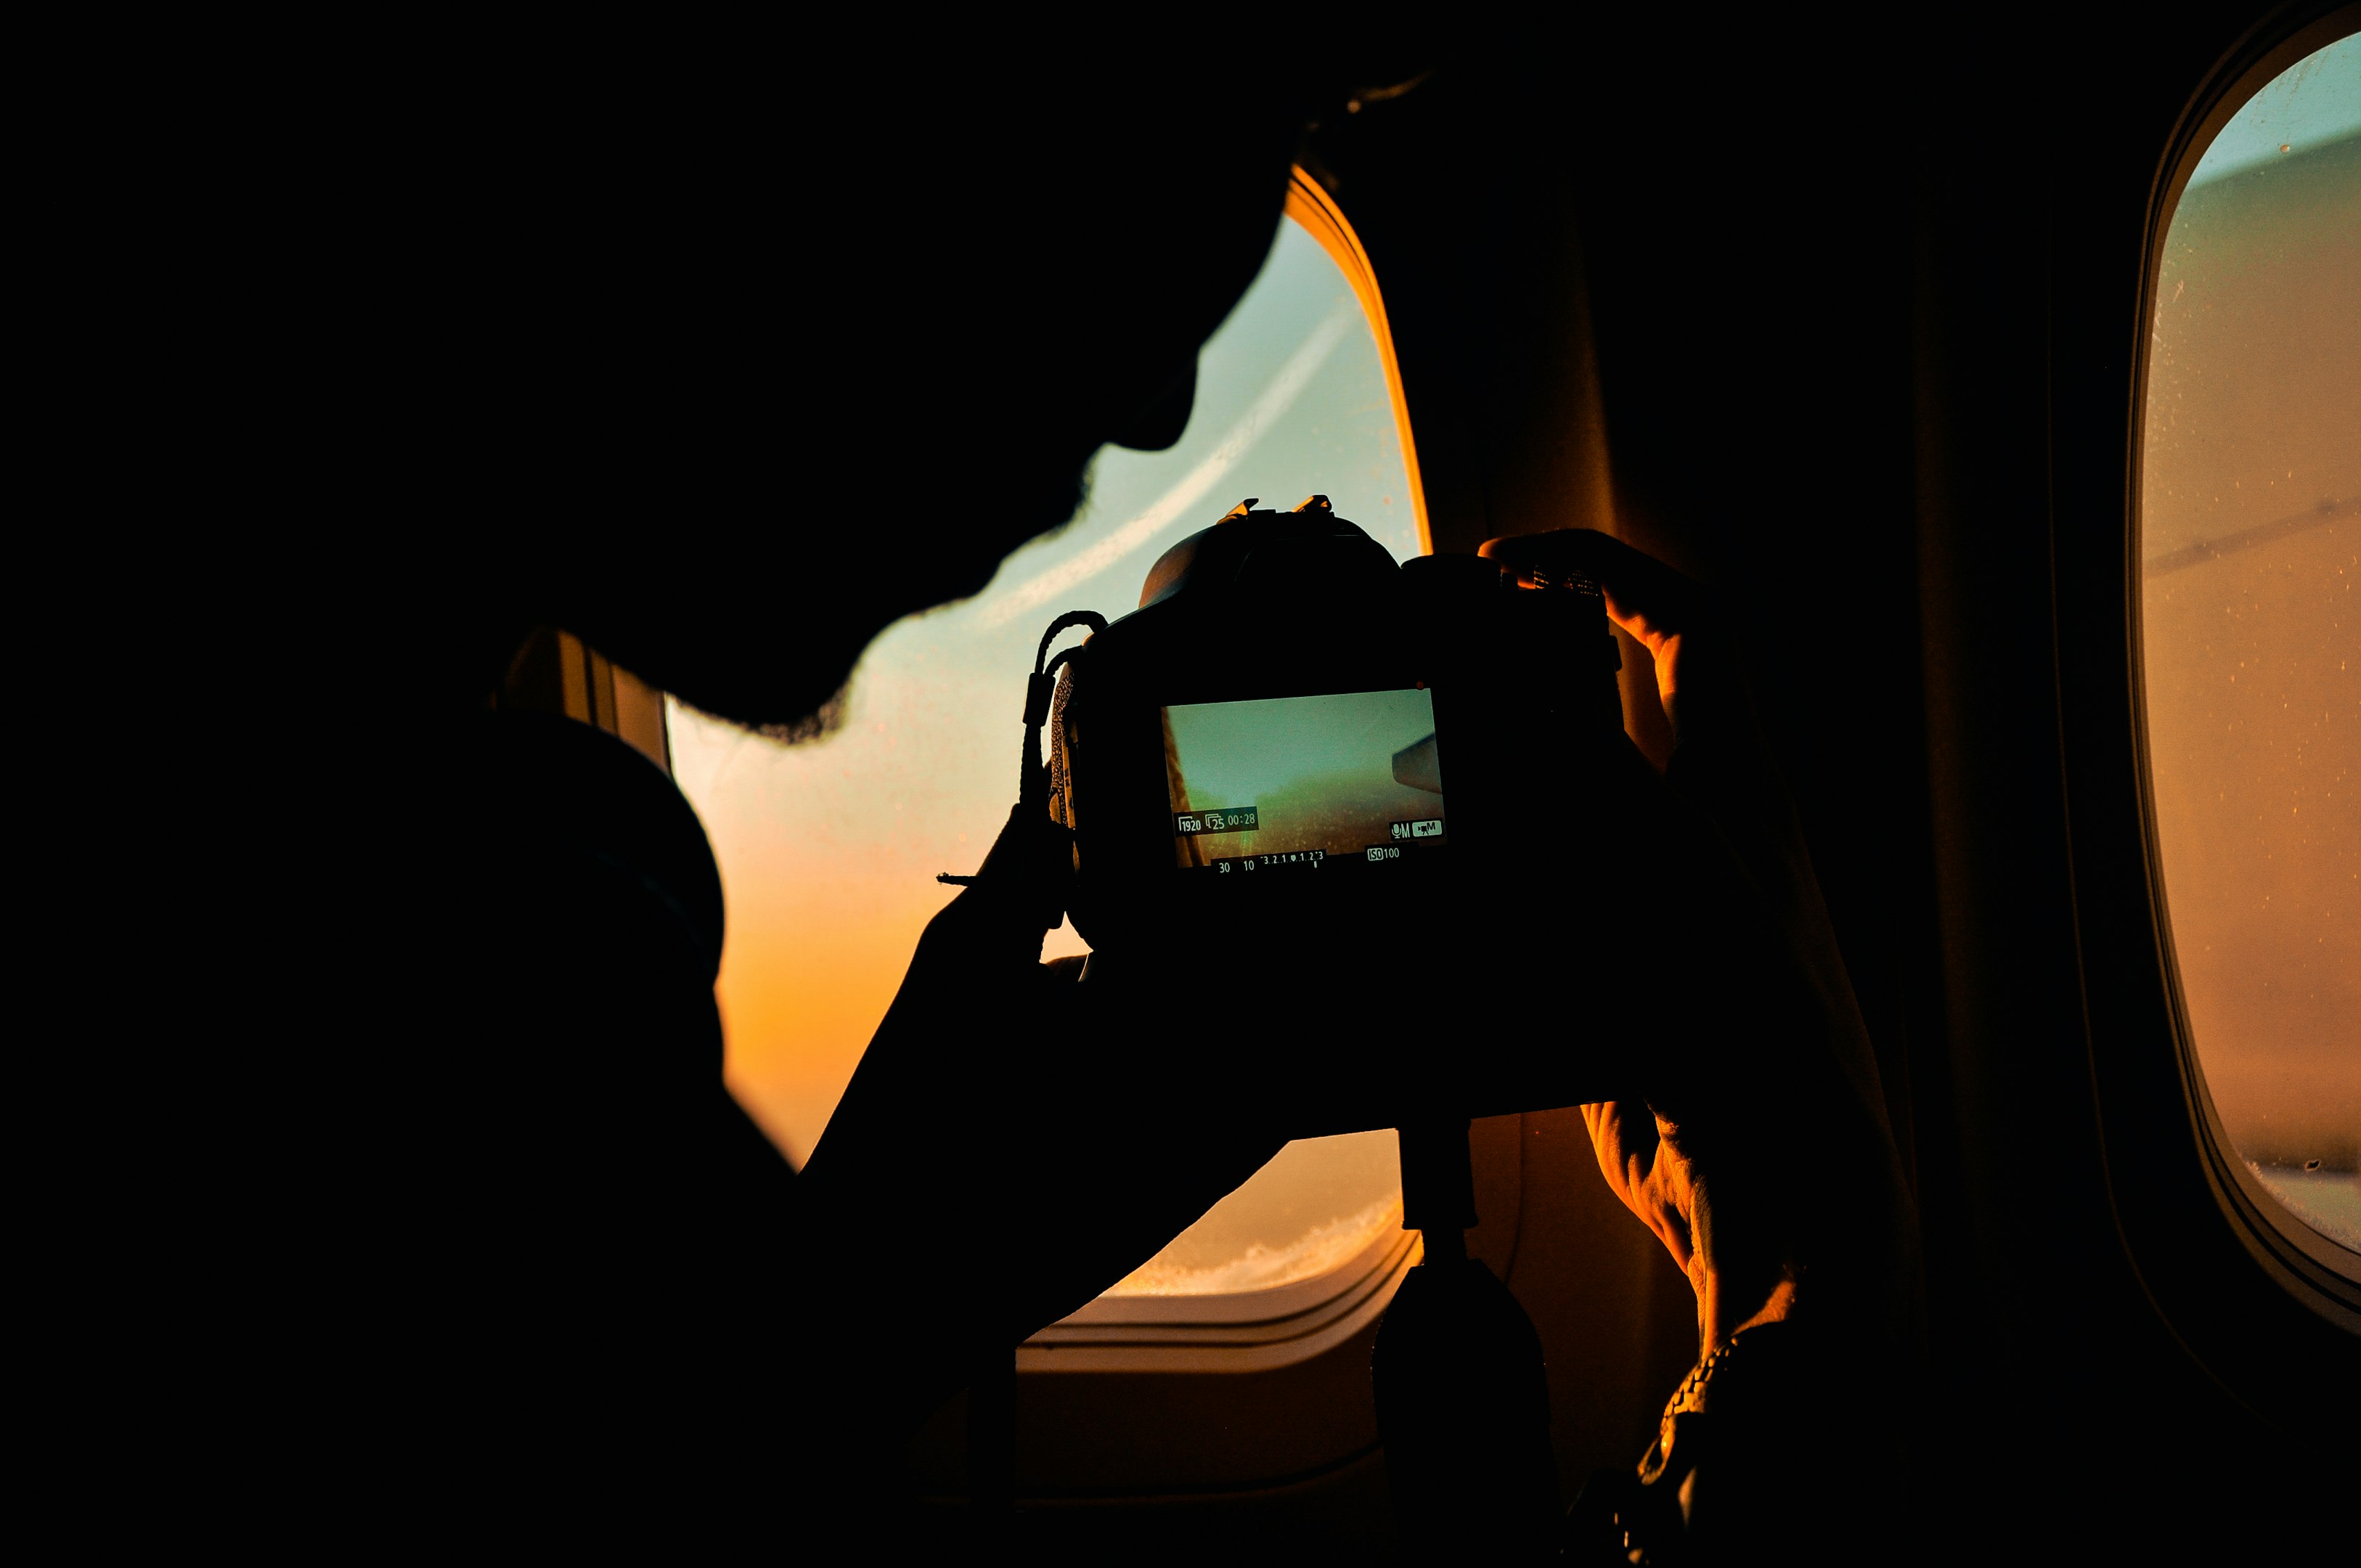 a person taking a picture of a plane window